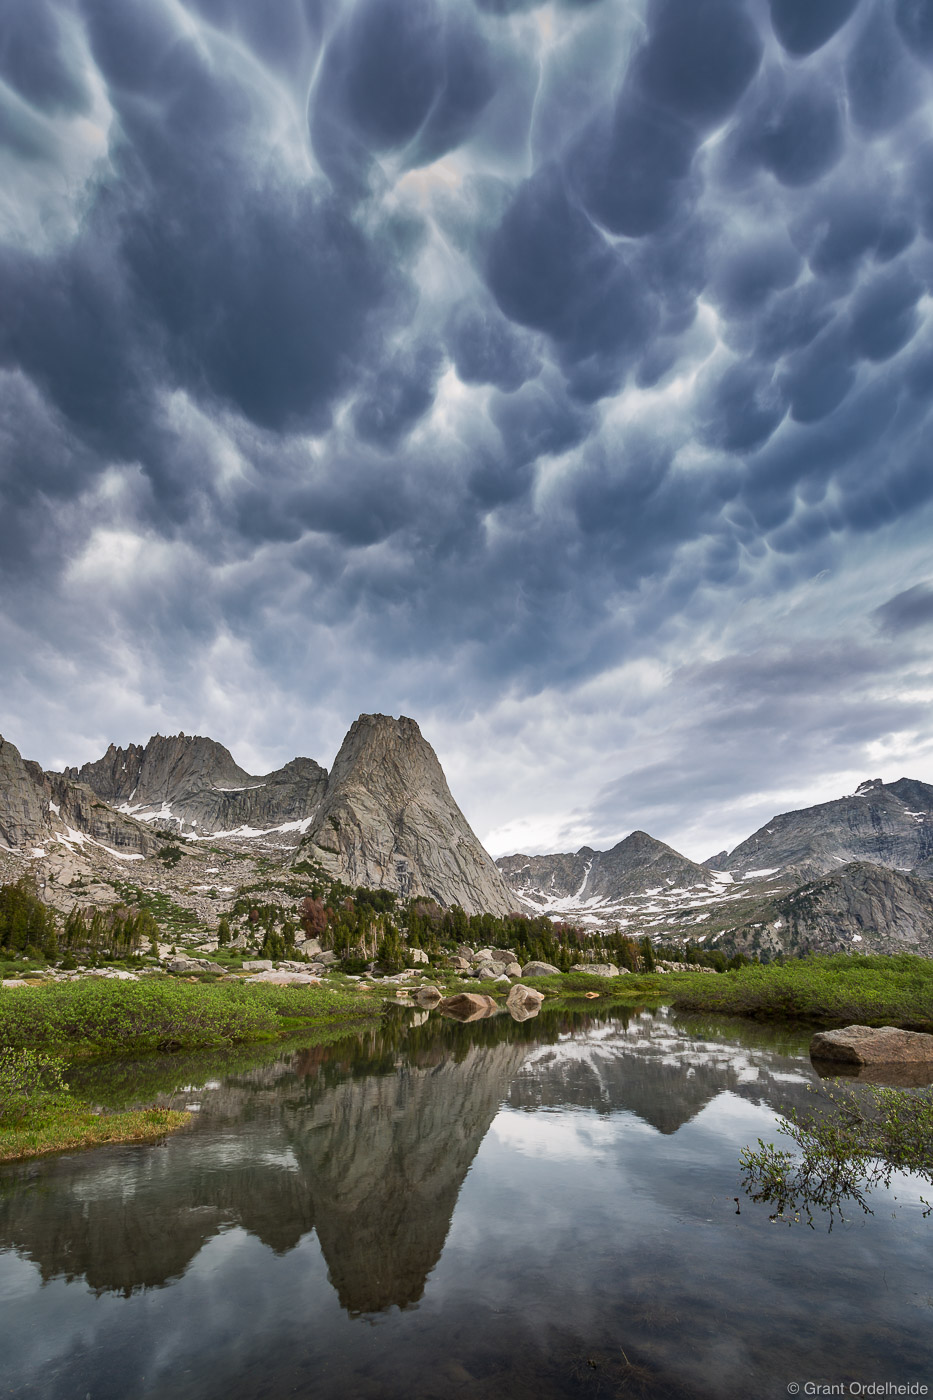 Mammatus clouds forming over Pingora Peak in the Cirque of the Towers.